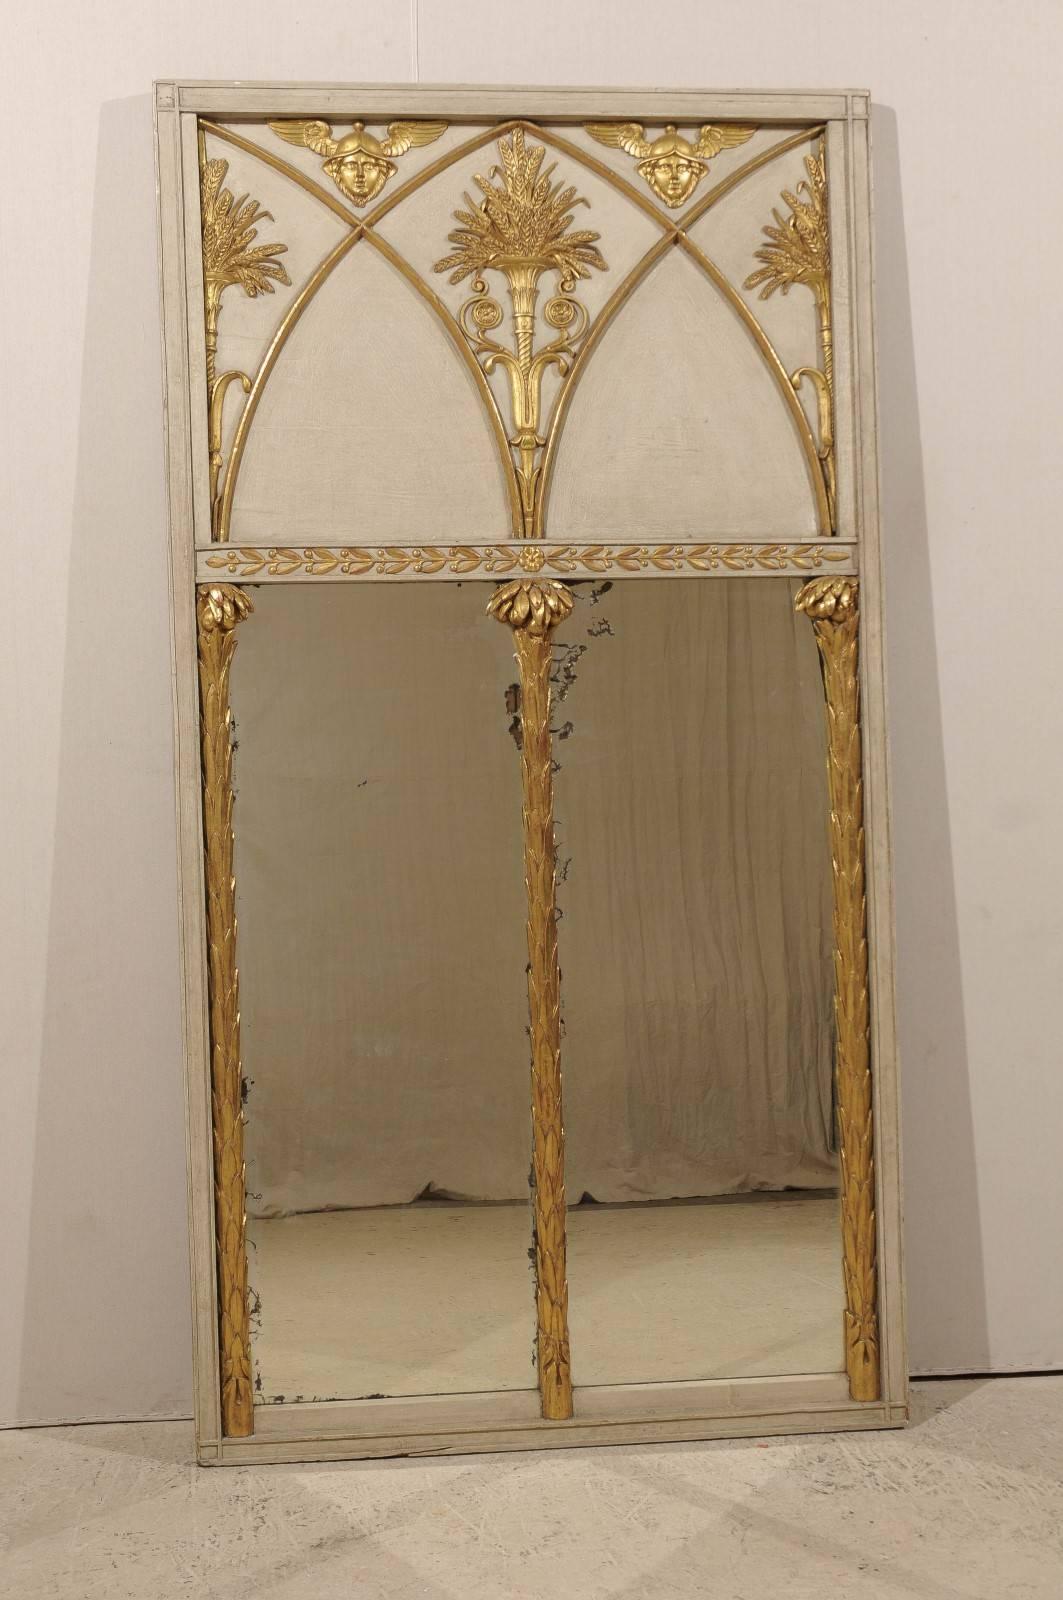 An English Regency period trumeau mirror. This 19th century wooden mirror features a painted frame highlighted with giltwood motifs inspired from the Greco-Roman vocabulary. The wooden panel in the upper part is divided by a decor reminiscent of